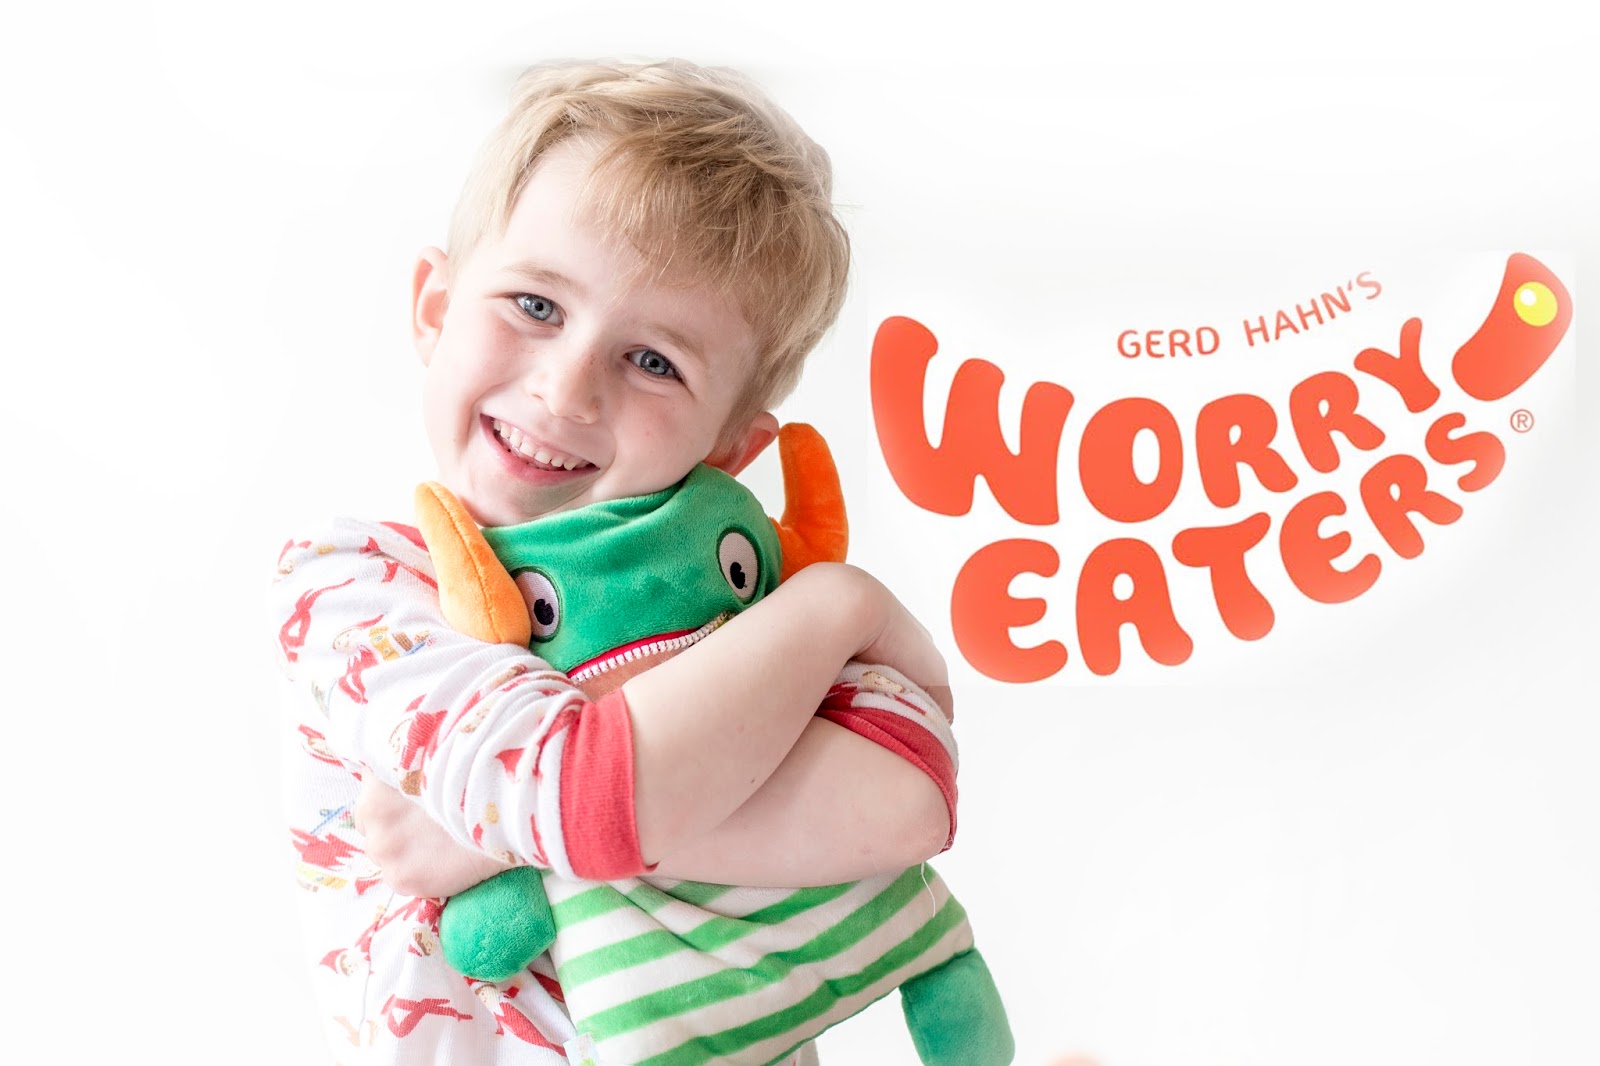 WORRY EATERS: FURRY THERAPY FOR LITTLE ONES?